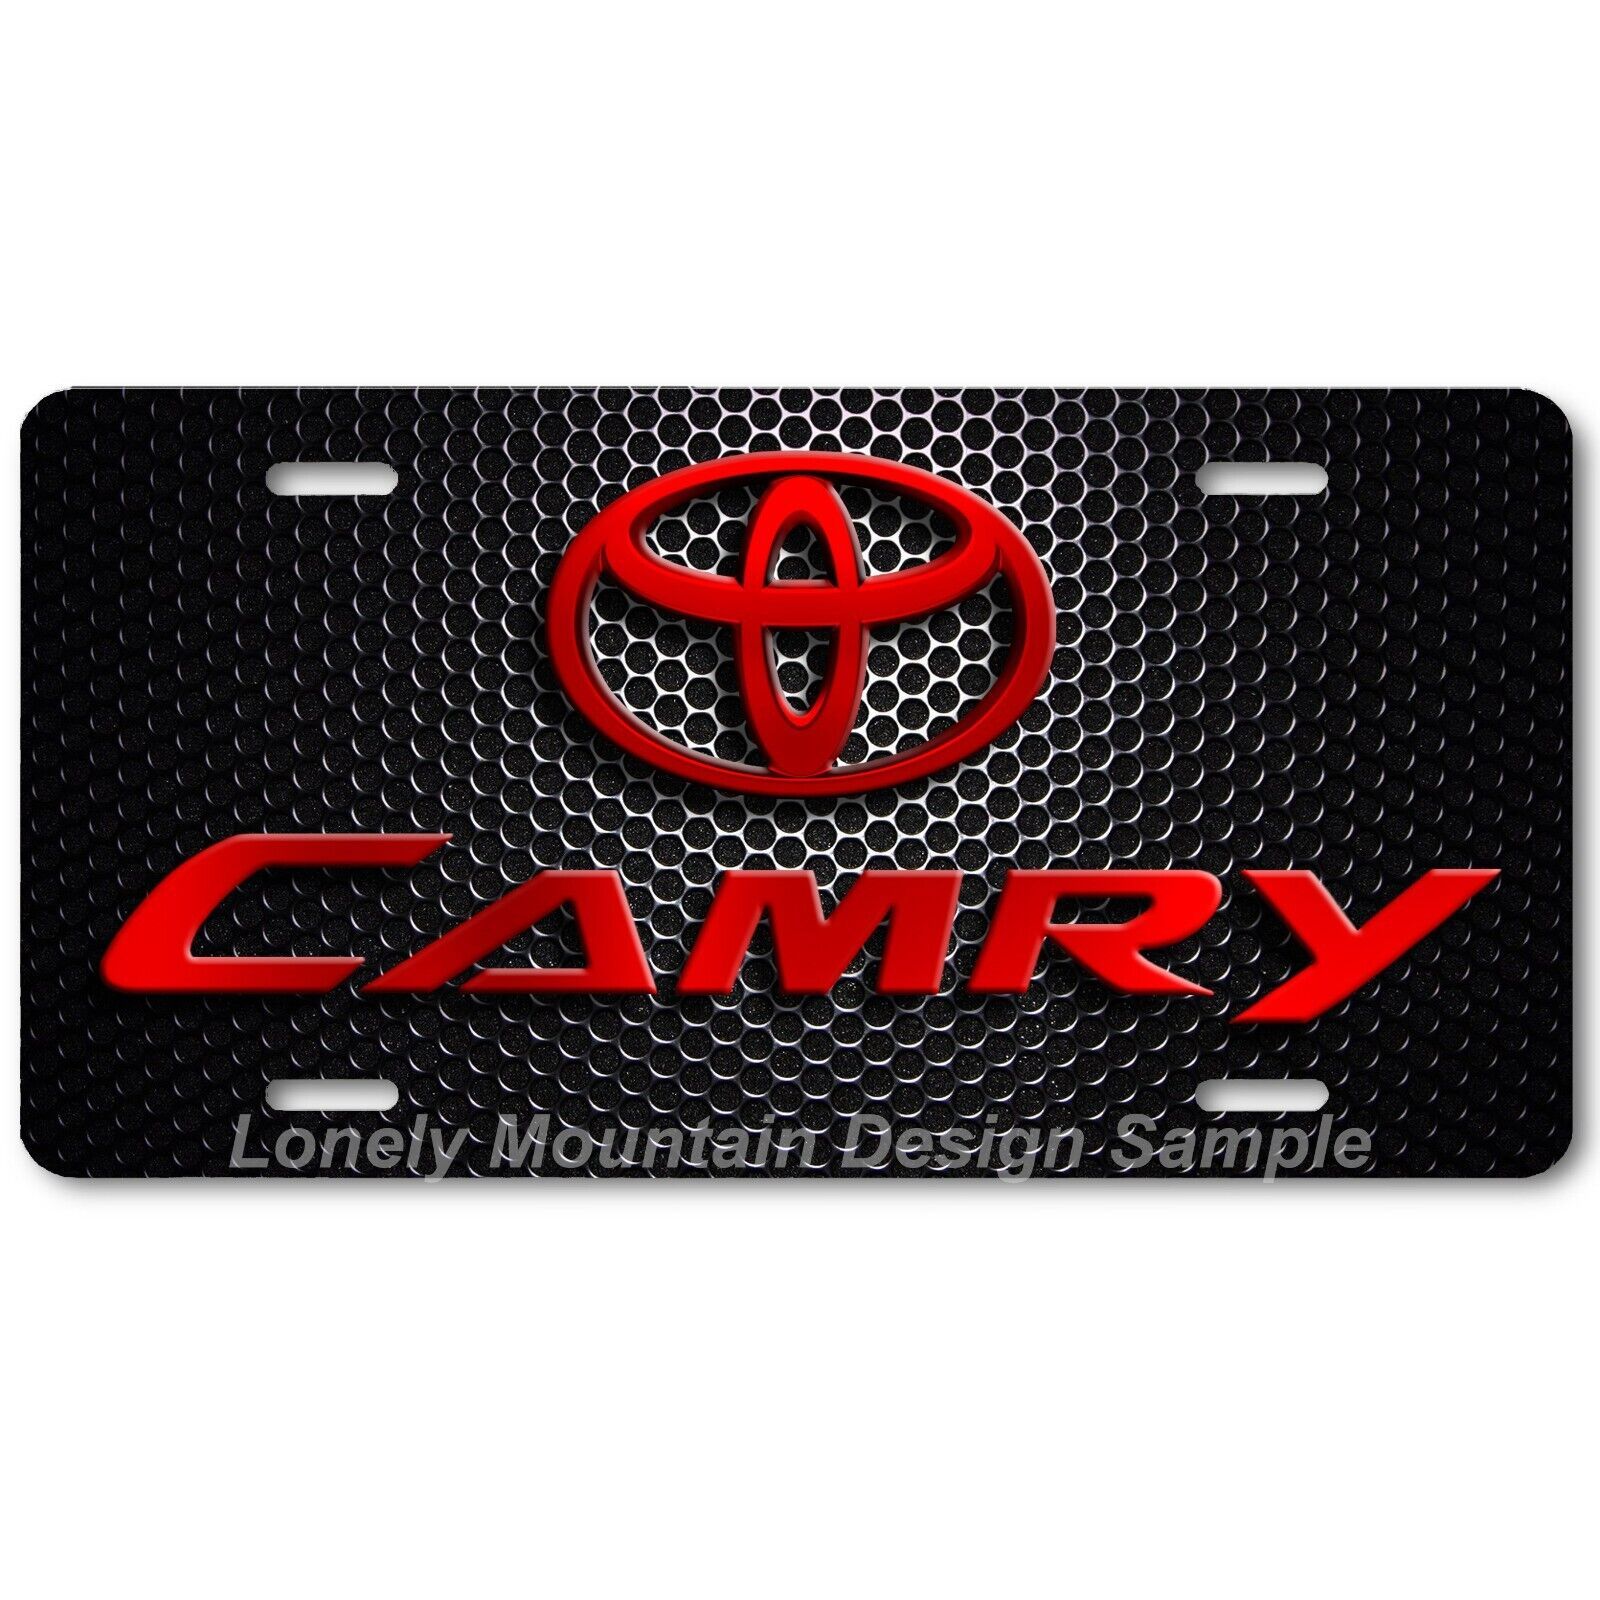 Toyota Camry Inspired Art Red on Mesh FLAT Aluminum Novelty License Tag Plate - $16.19